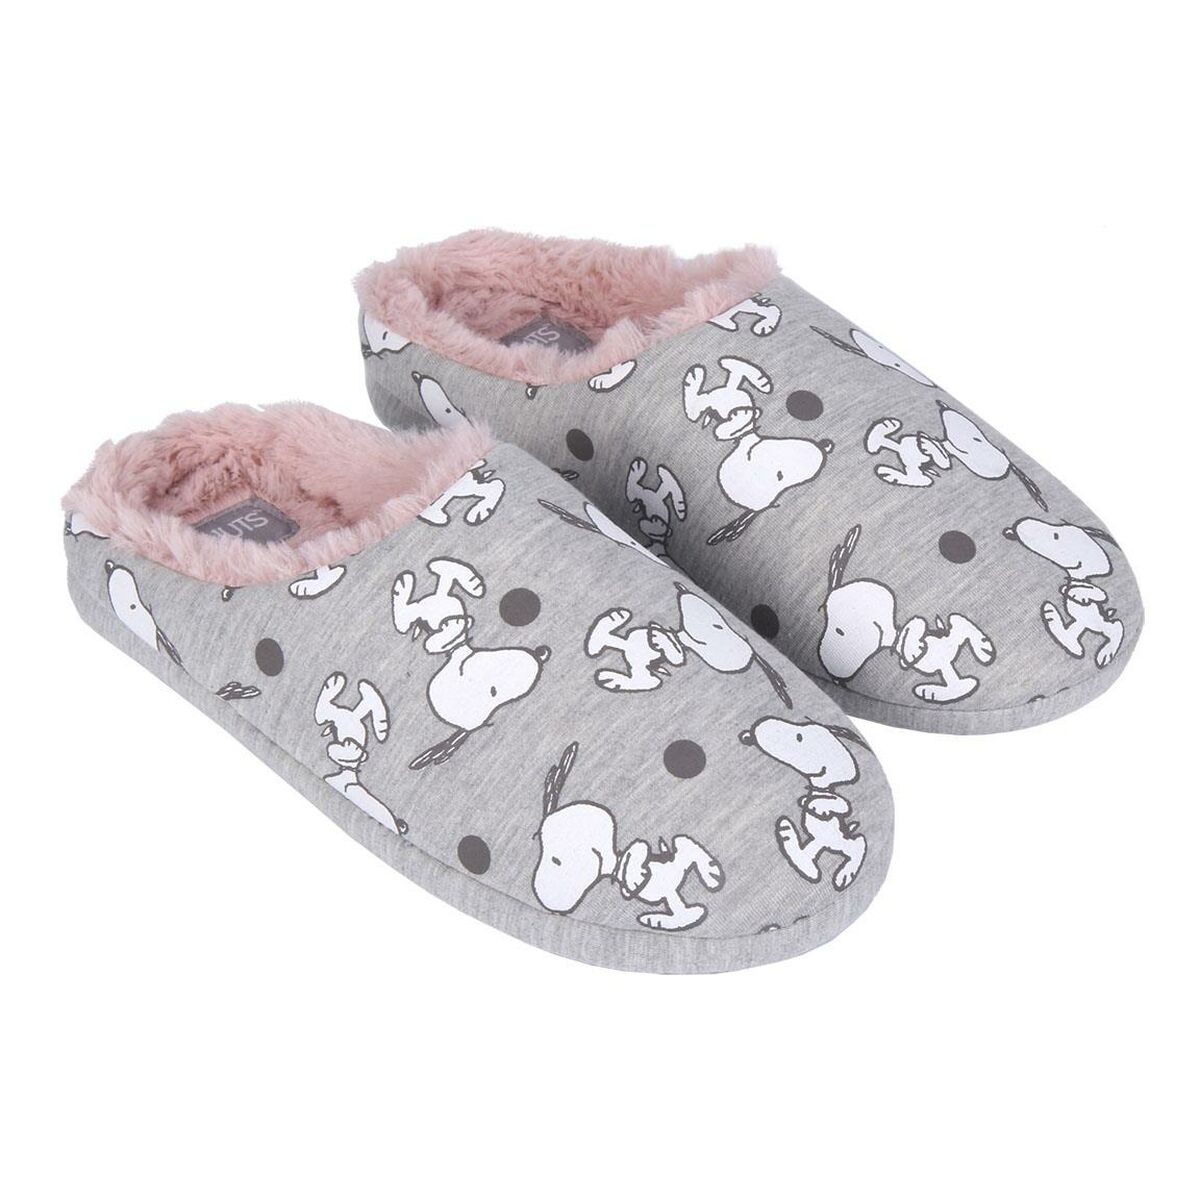 House Slippers Snoopy Light grey